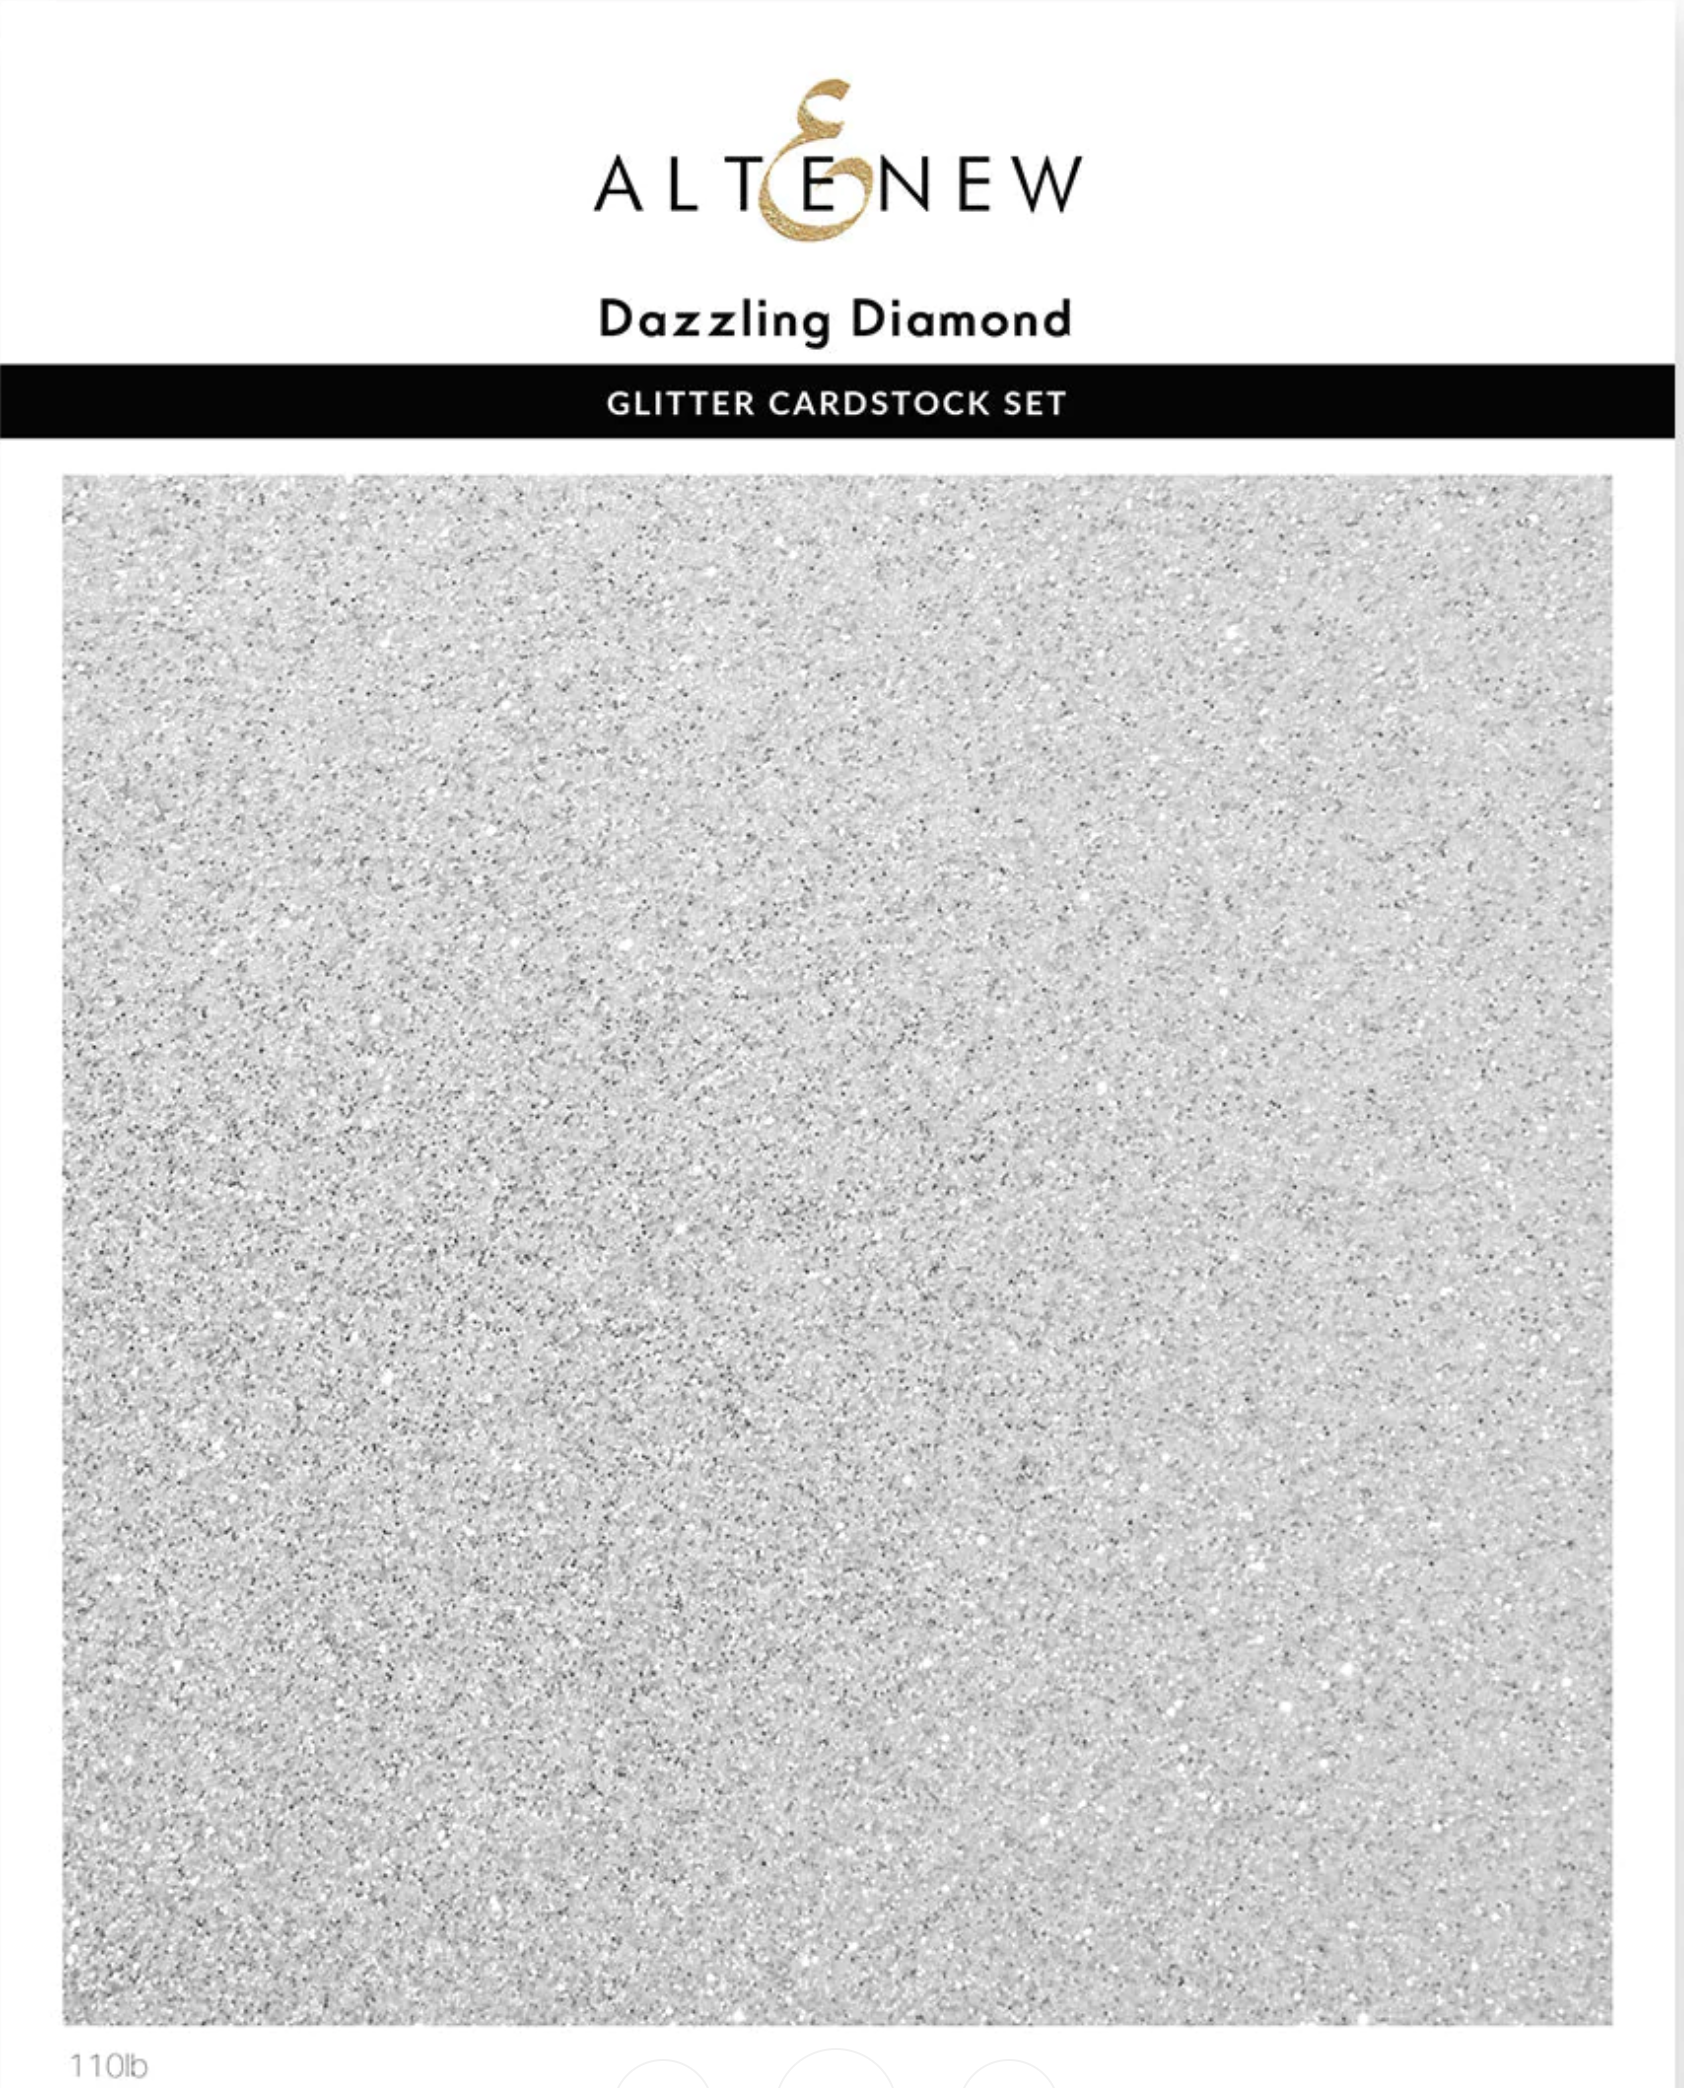 Gold Glitter Cardstock Paper for Card Making (8.5 x 11 In, 24